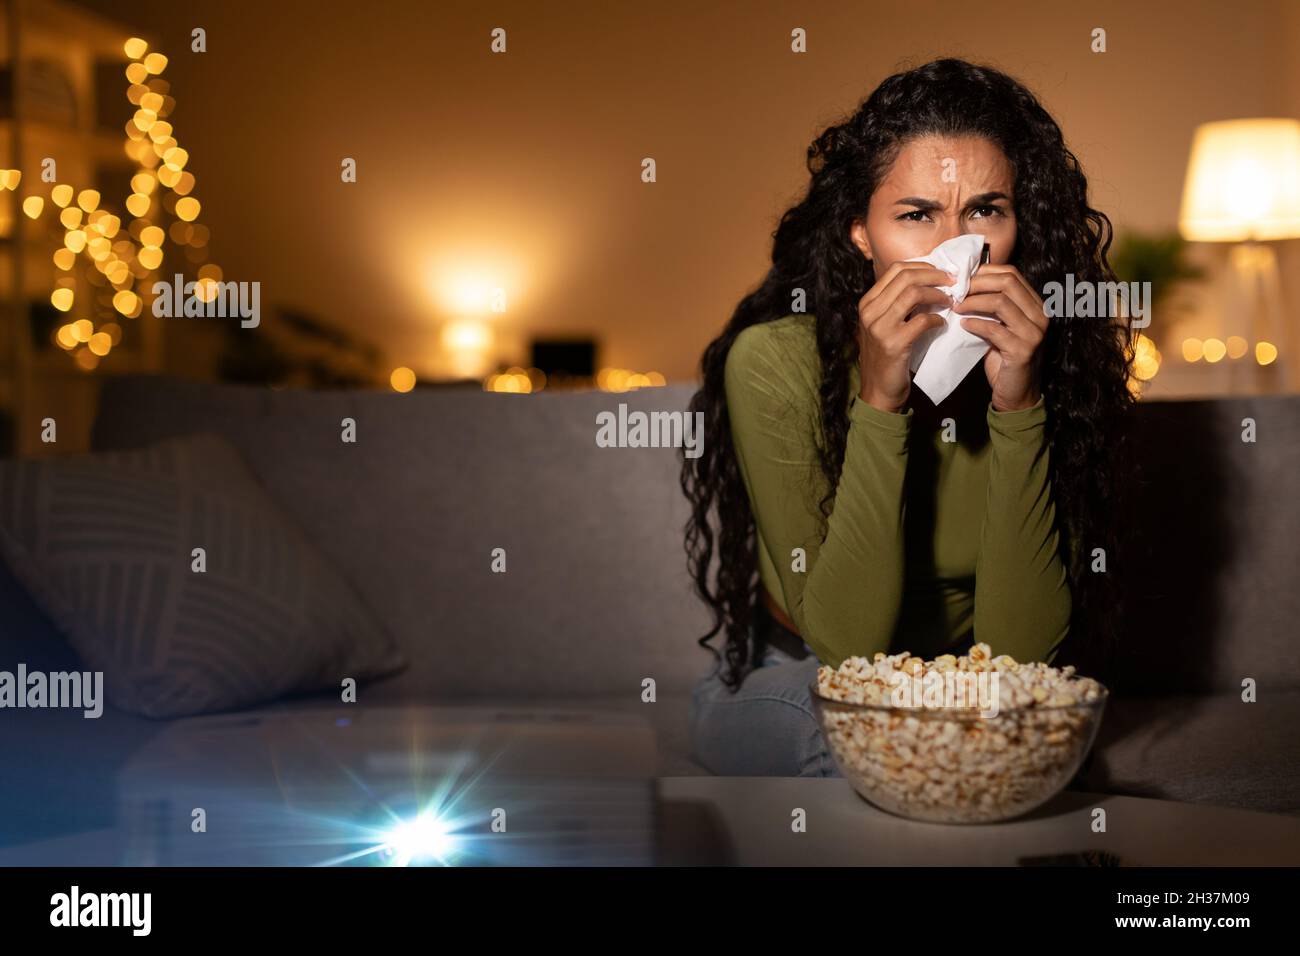 Unhappy Woman Crying Watching Drama Film Using Projector At Home Stock Photo